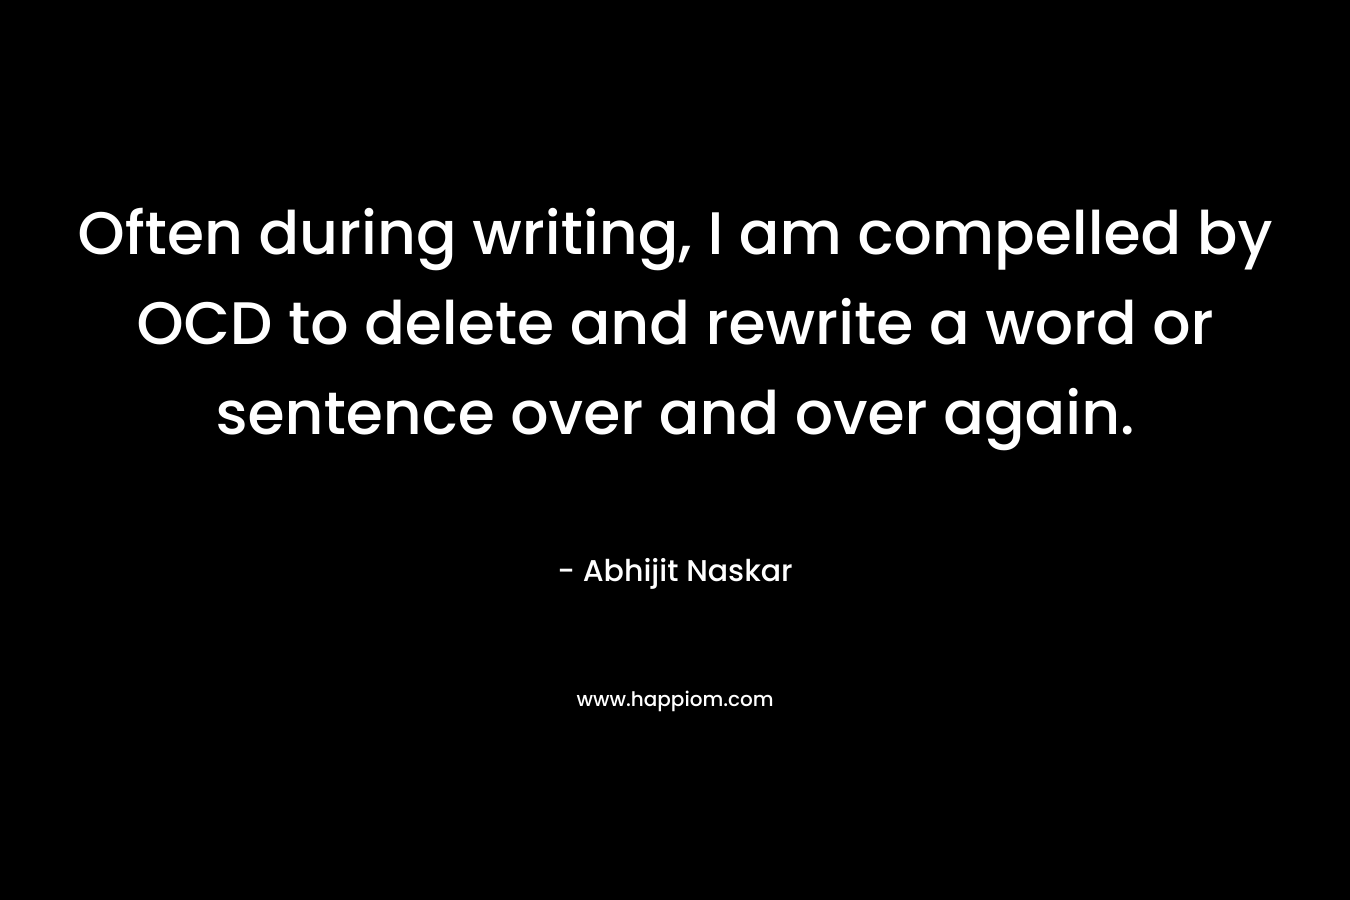 Often during writing, I am compelled by OCD to delete and rewrite a word or sentence over and over again. – Abhijit Naskar